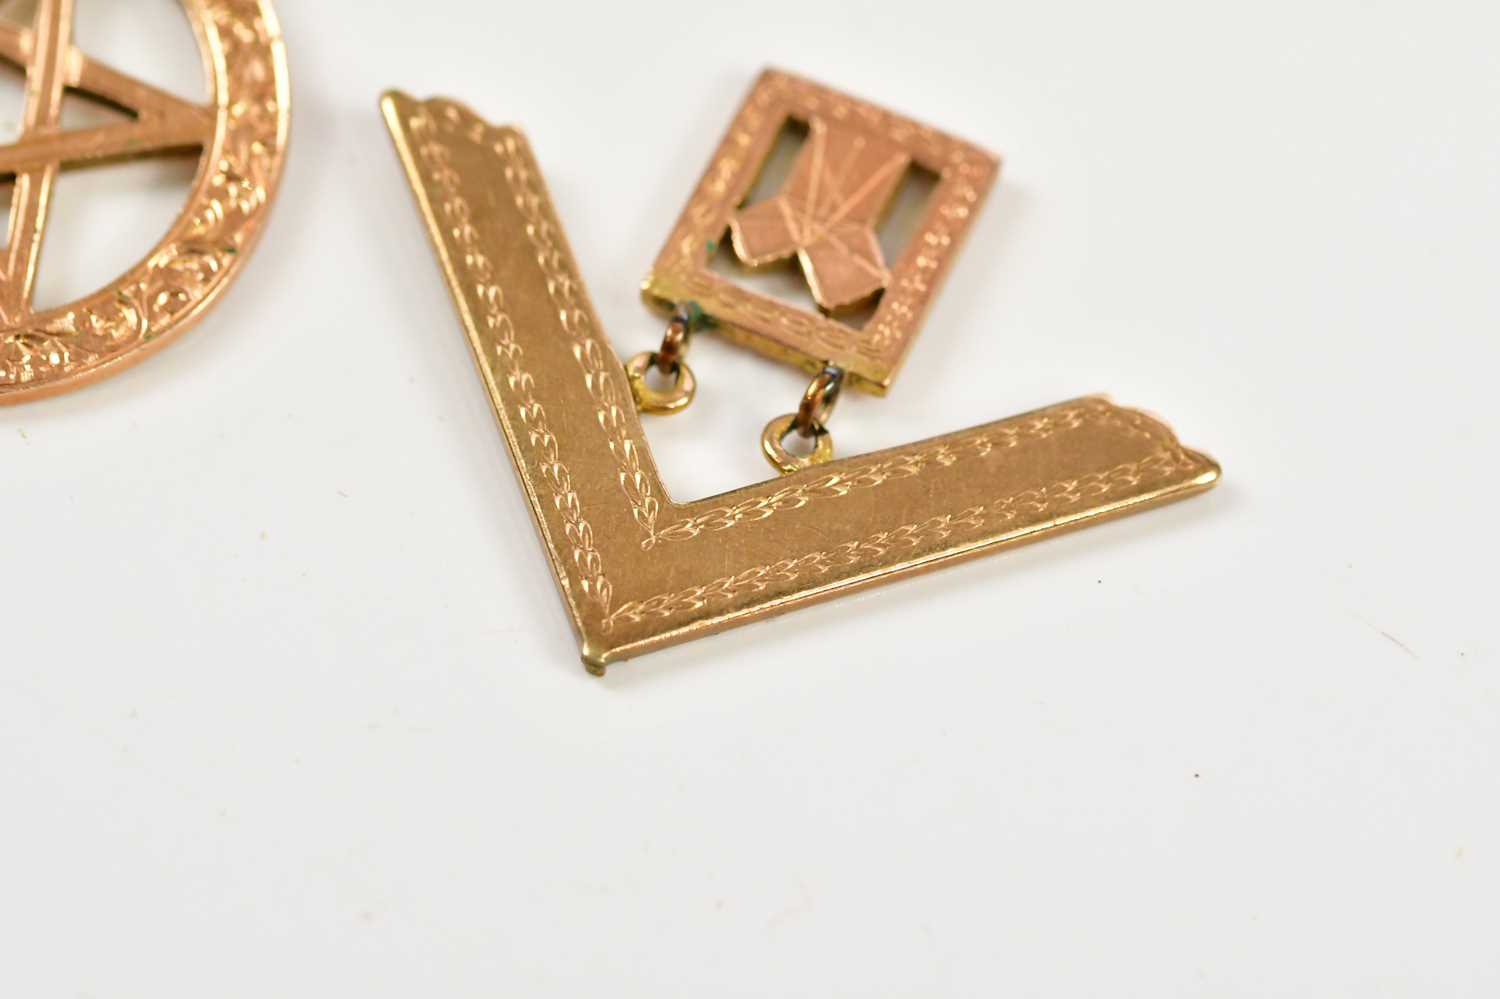 A 15ct yellow gold Masonic fob, approx 4.2g, and a 9ct yellow gold Masonic fob, approx 3.7g (2). - Image 3 of 5